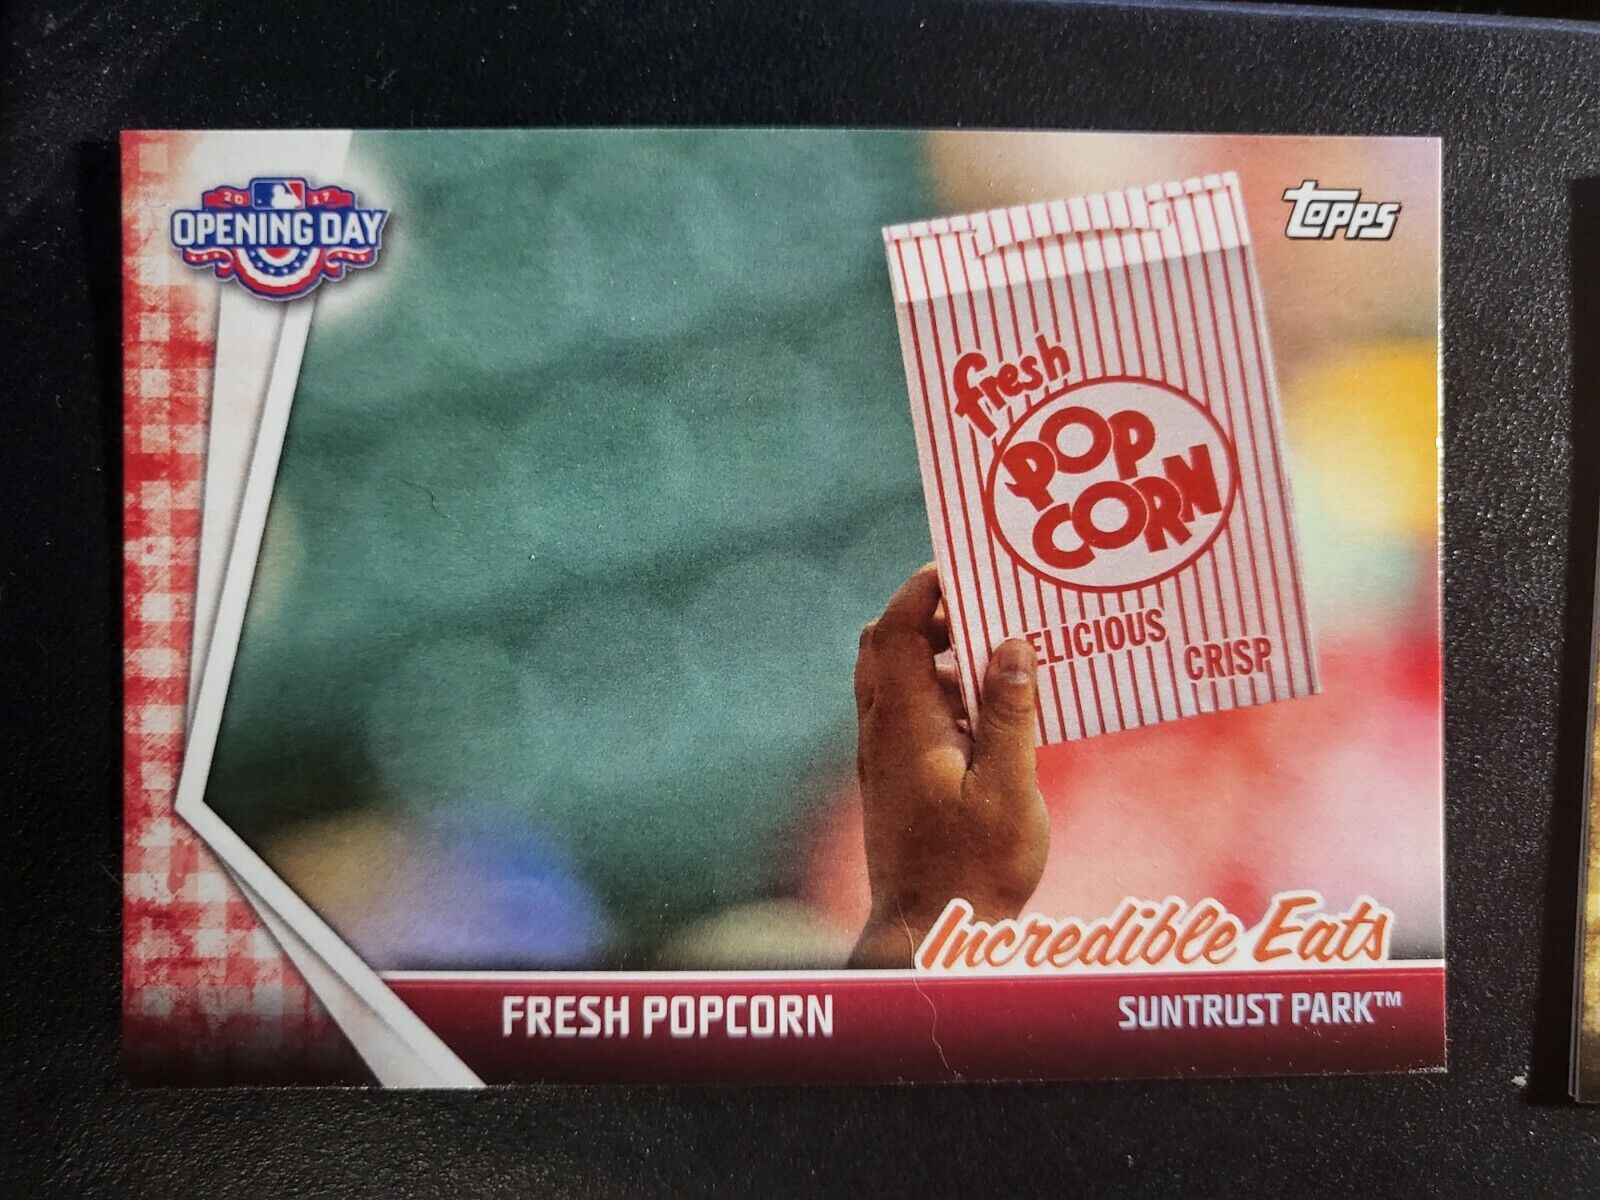 2017 Topps Series 1, 2, Update & Opening Day Inserts. Complete your insert set.